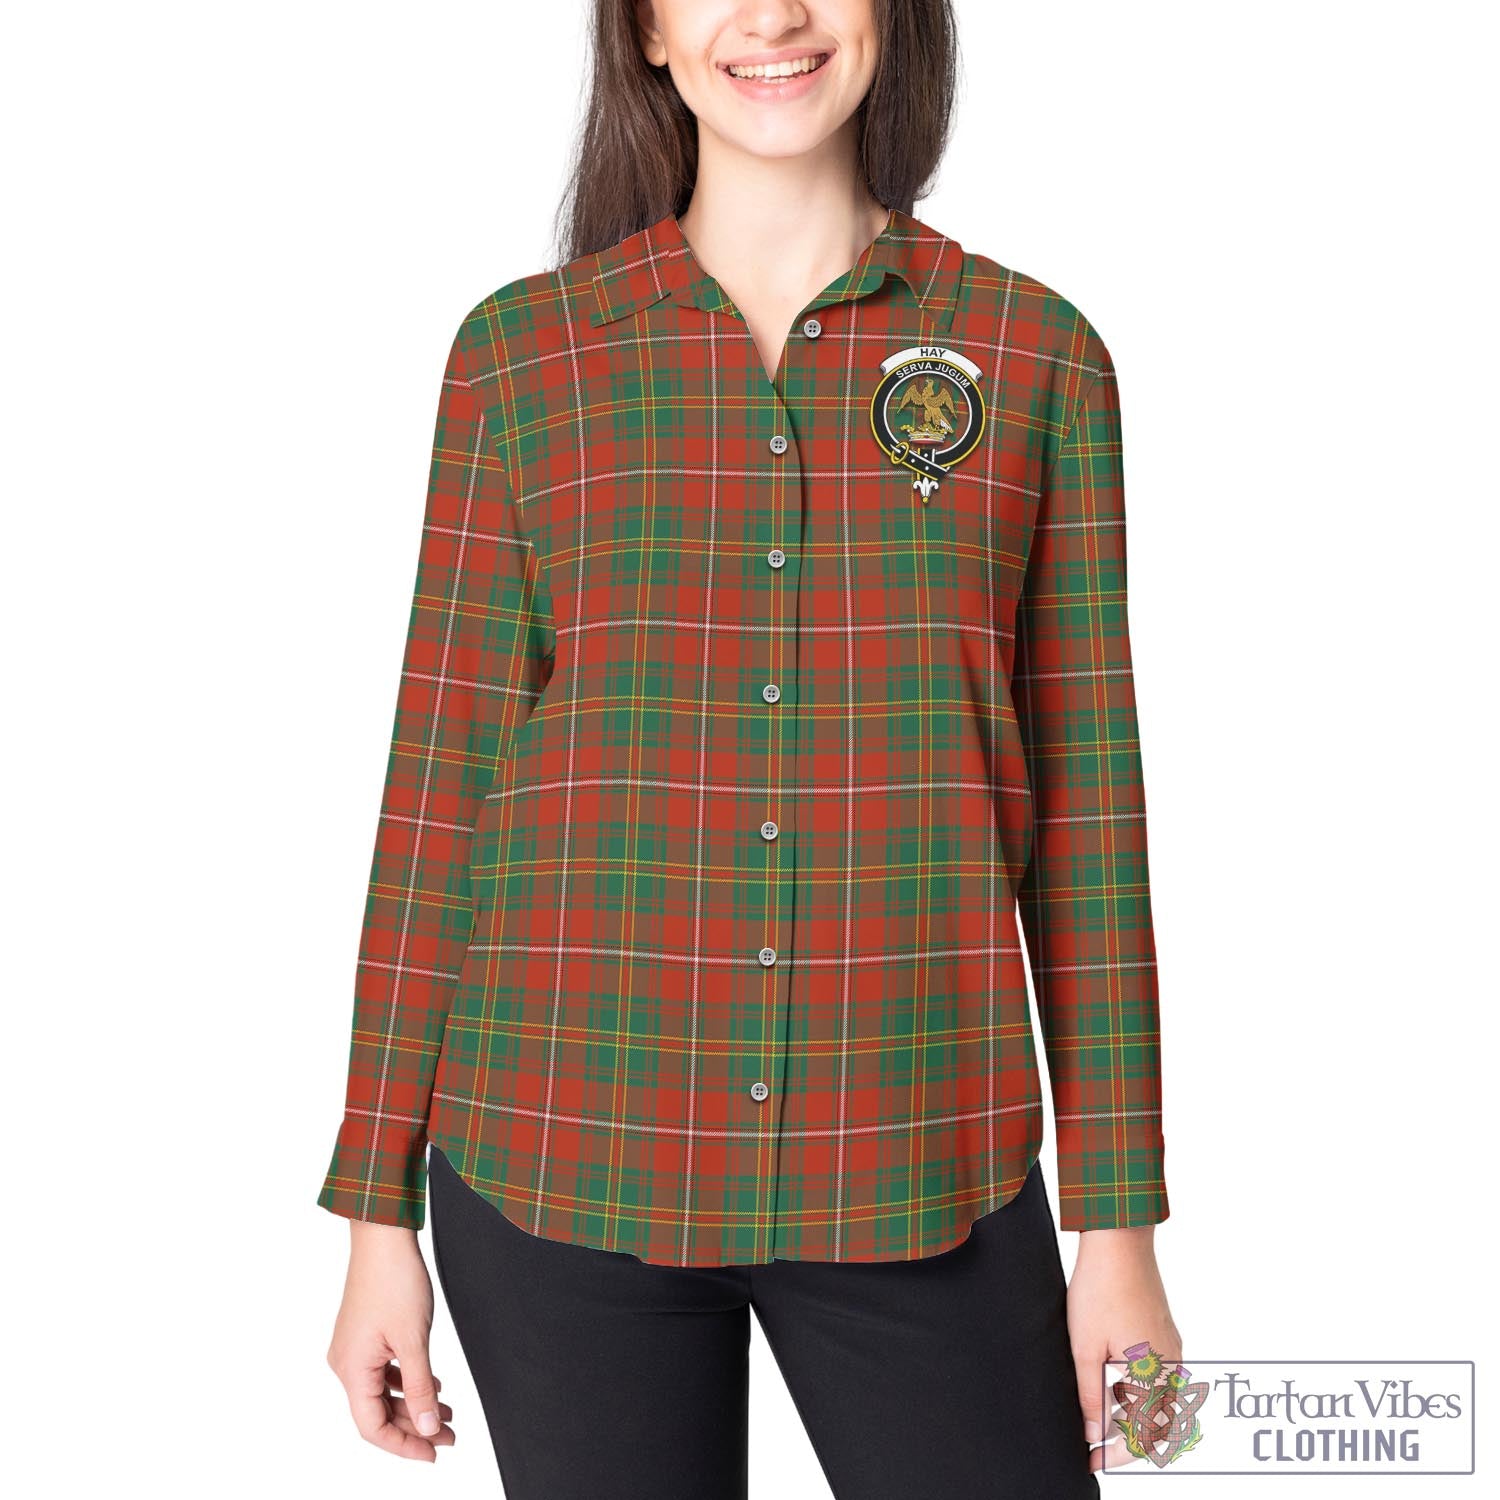 Tartan Vibes Clothing Hay Ancient Tartan Womens Casual Shirt with Family Crest